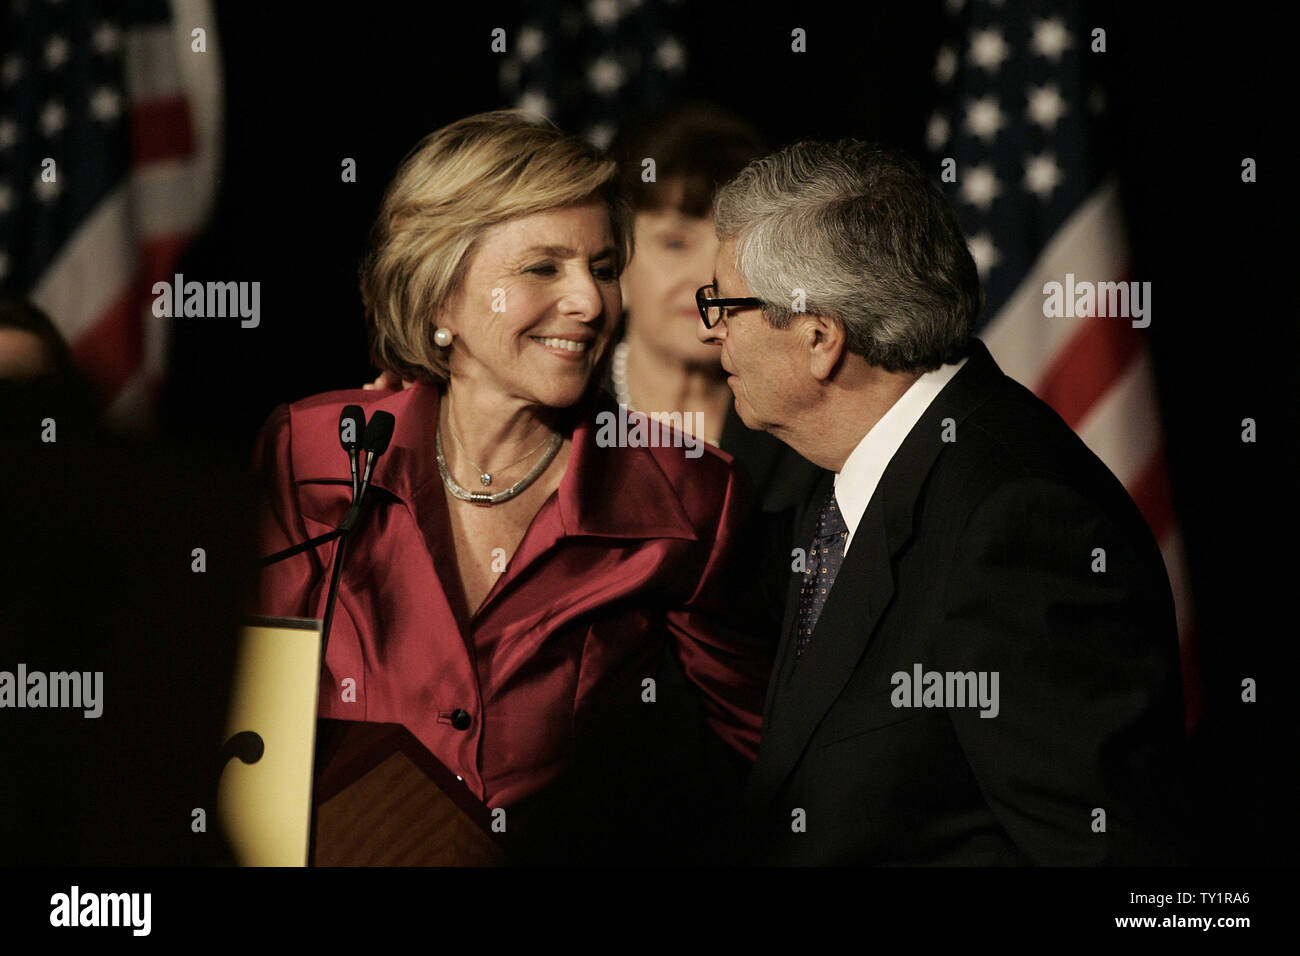 Democratic Sen. Barbara Boxer, with her husband Stewart Boxer, declares victory over Republican candidate Carly Fiorina on election night November 2, 2010, at the Renaissance Hollywood Hotel in Los Angeles, California.  The Democrats held onto the Senate but the Republicans took control of the House in the Federal Elections.   UPI/Jonathan Alcorn Stock Photo